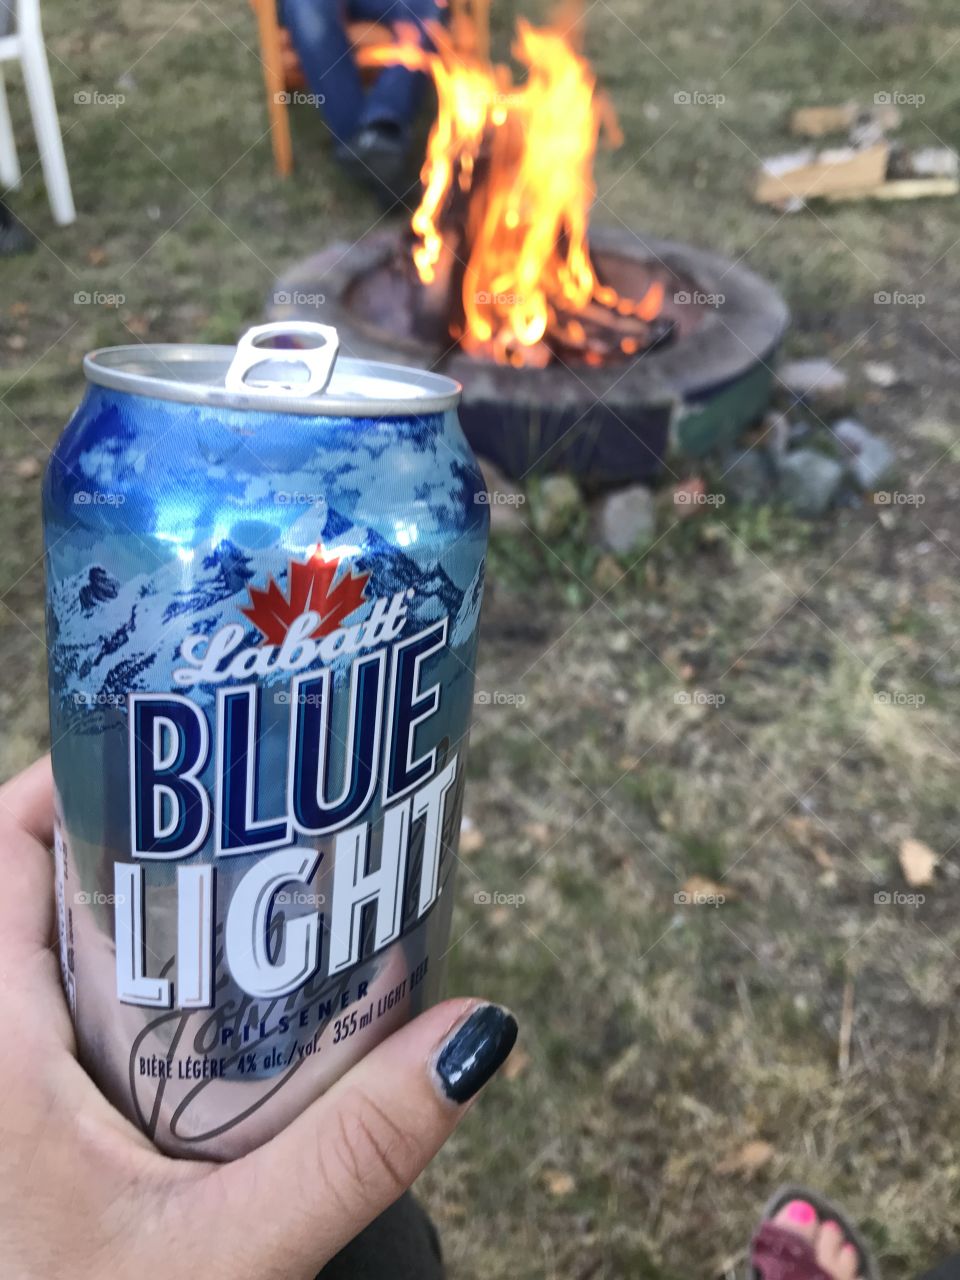 Fire and beer